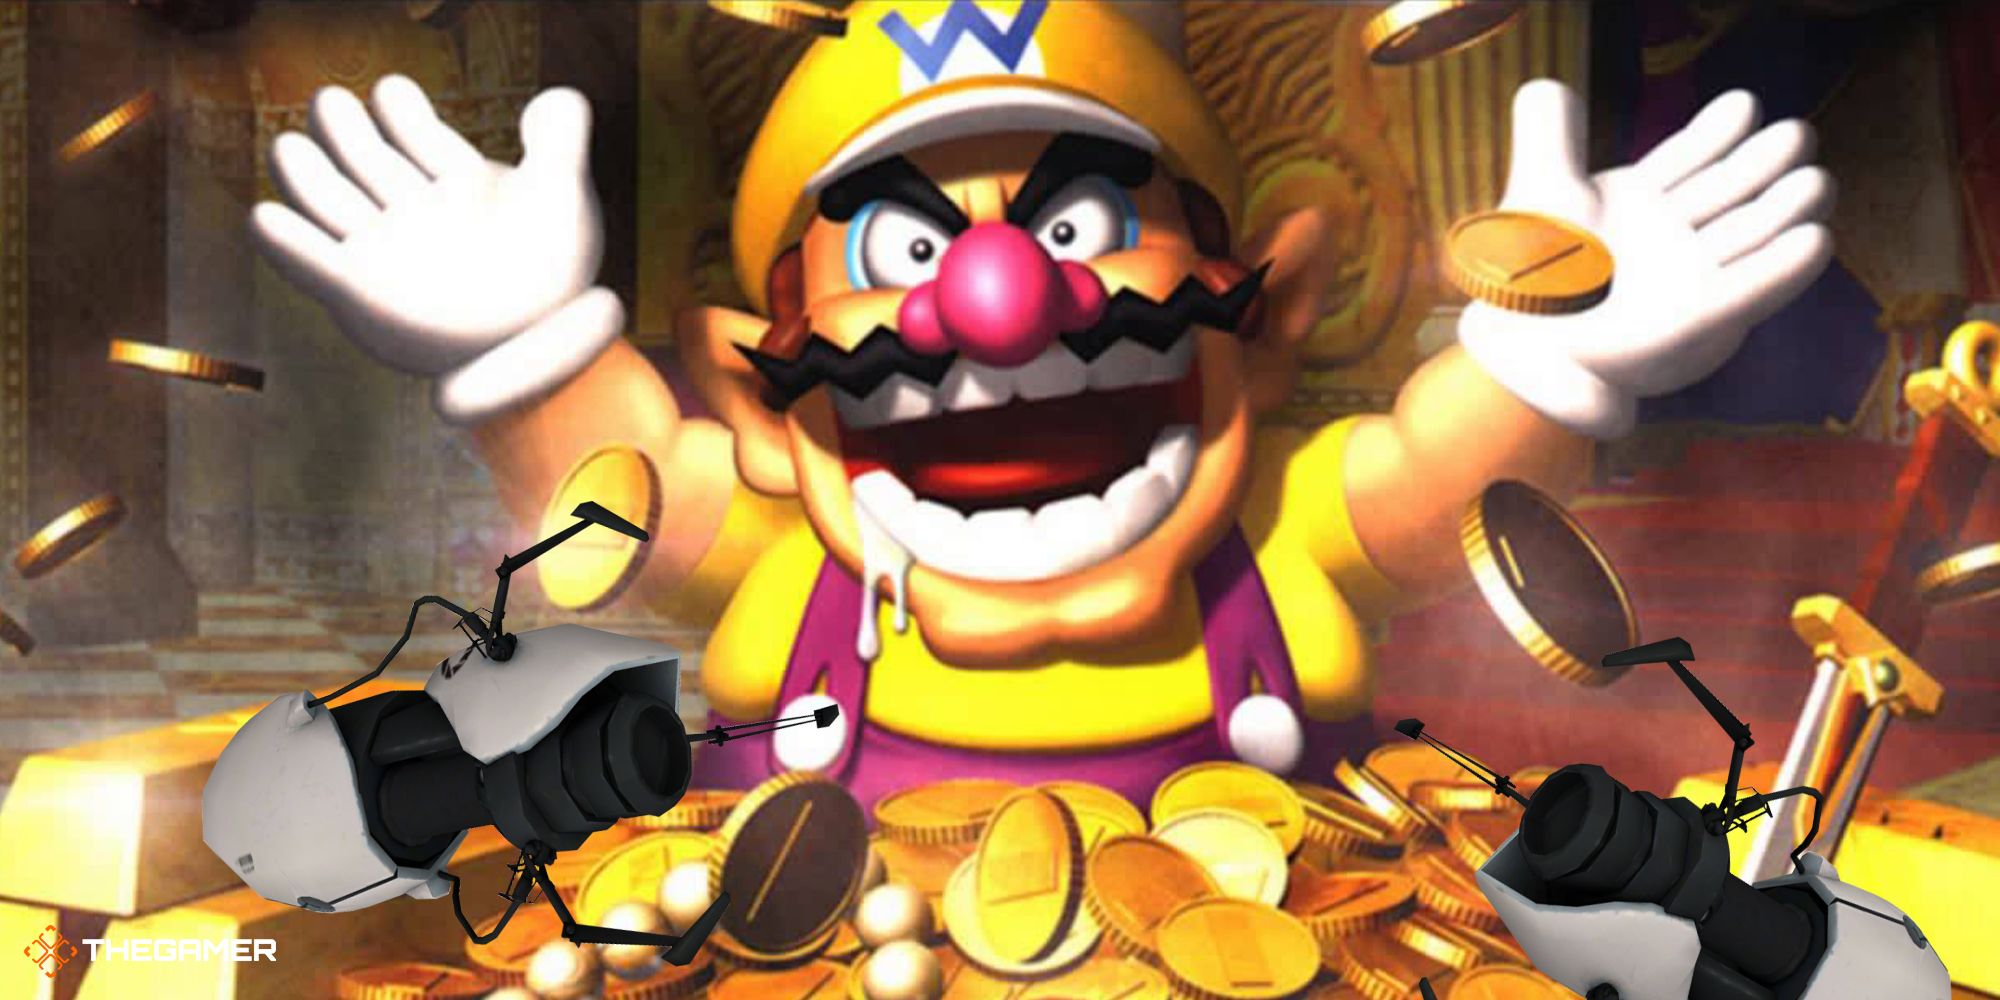 Photo of Wario with gold coins alongside photoshopped Portal guns